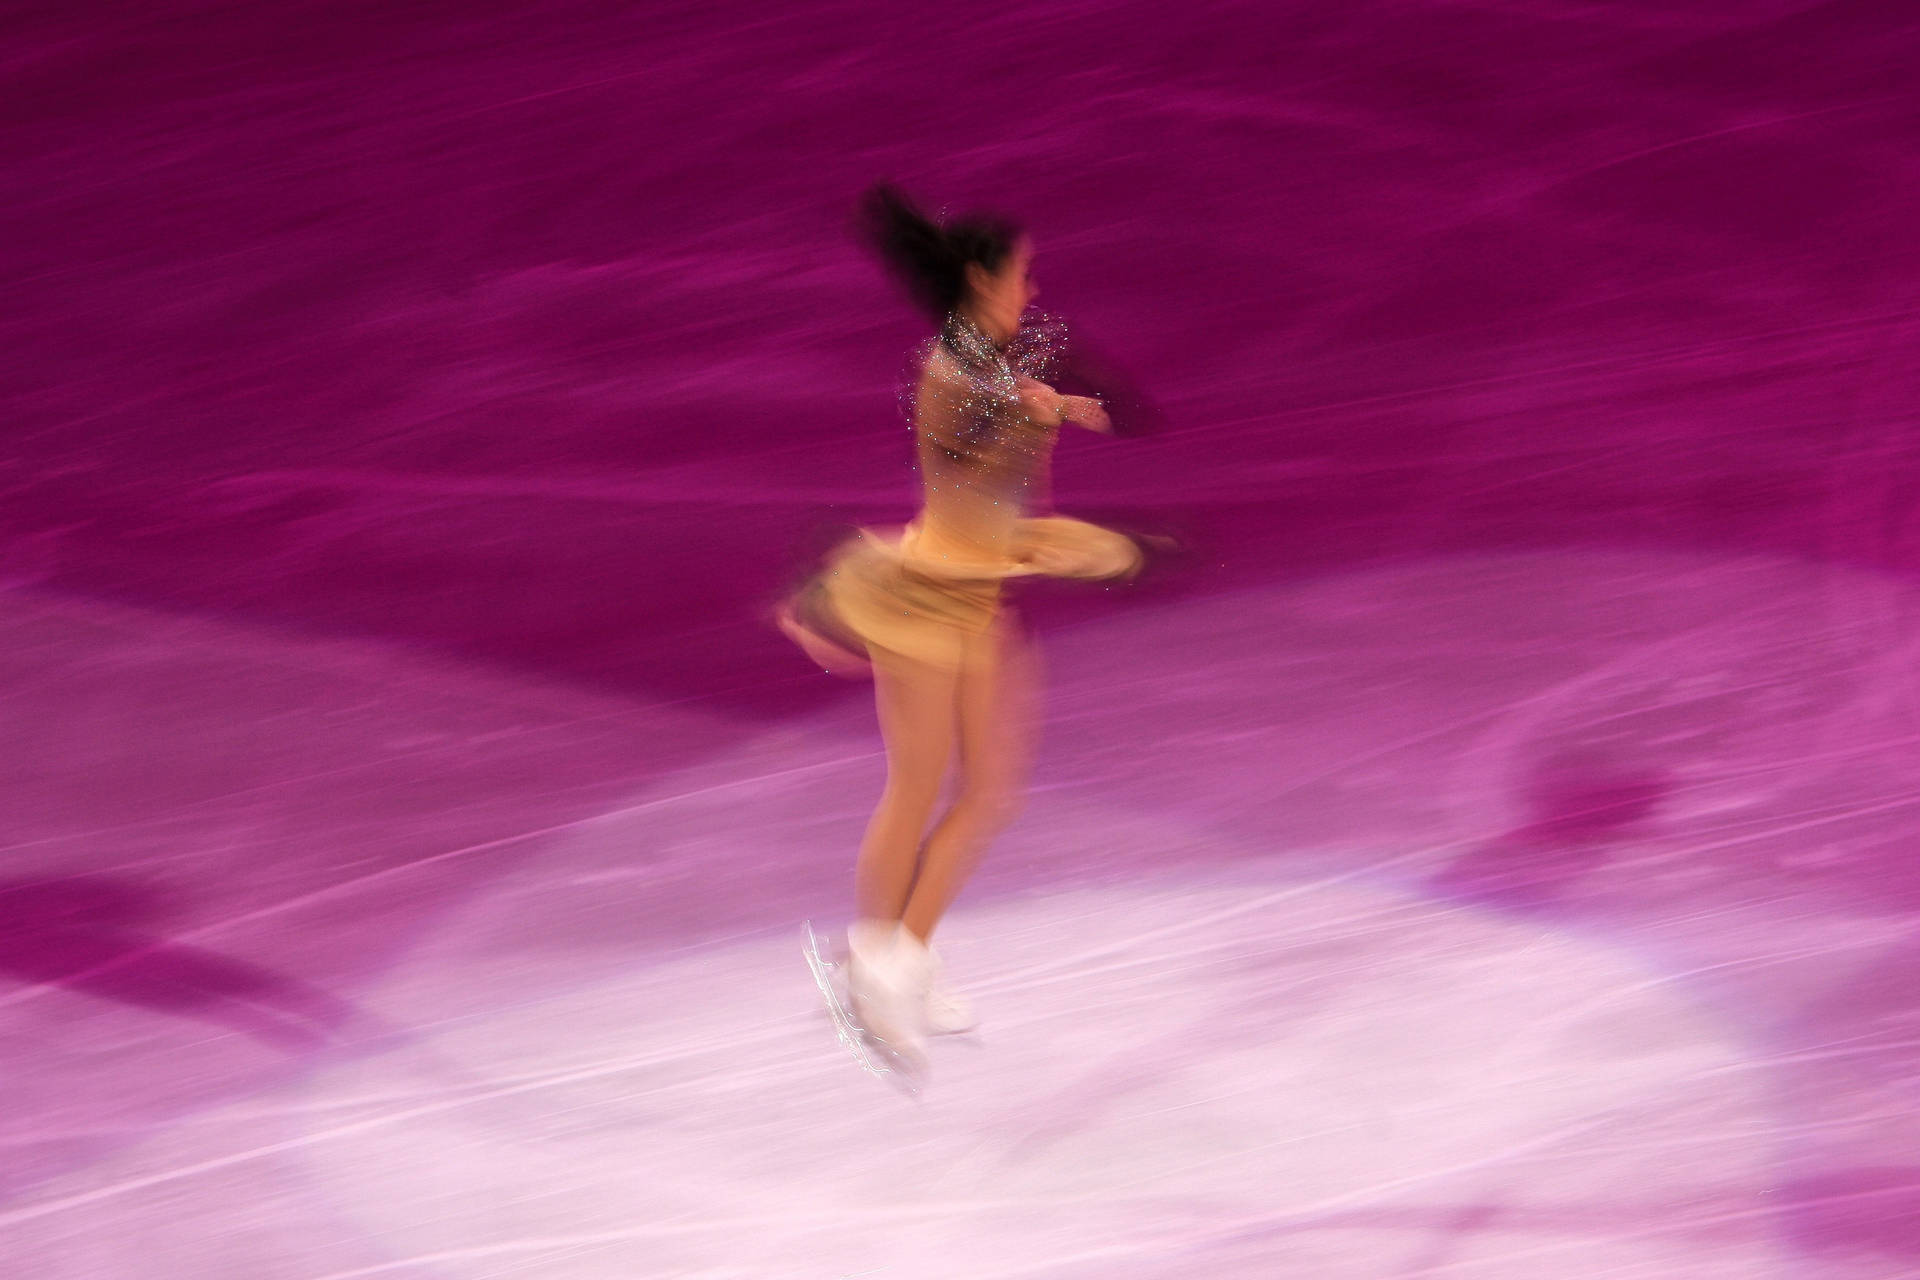 Girl Ice Skating In Exquisite Movement Wallpaper